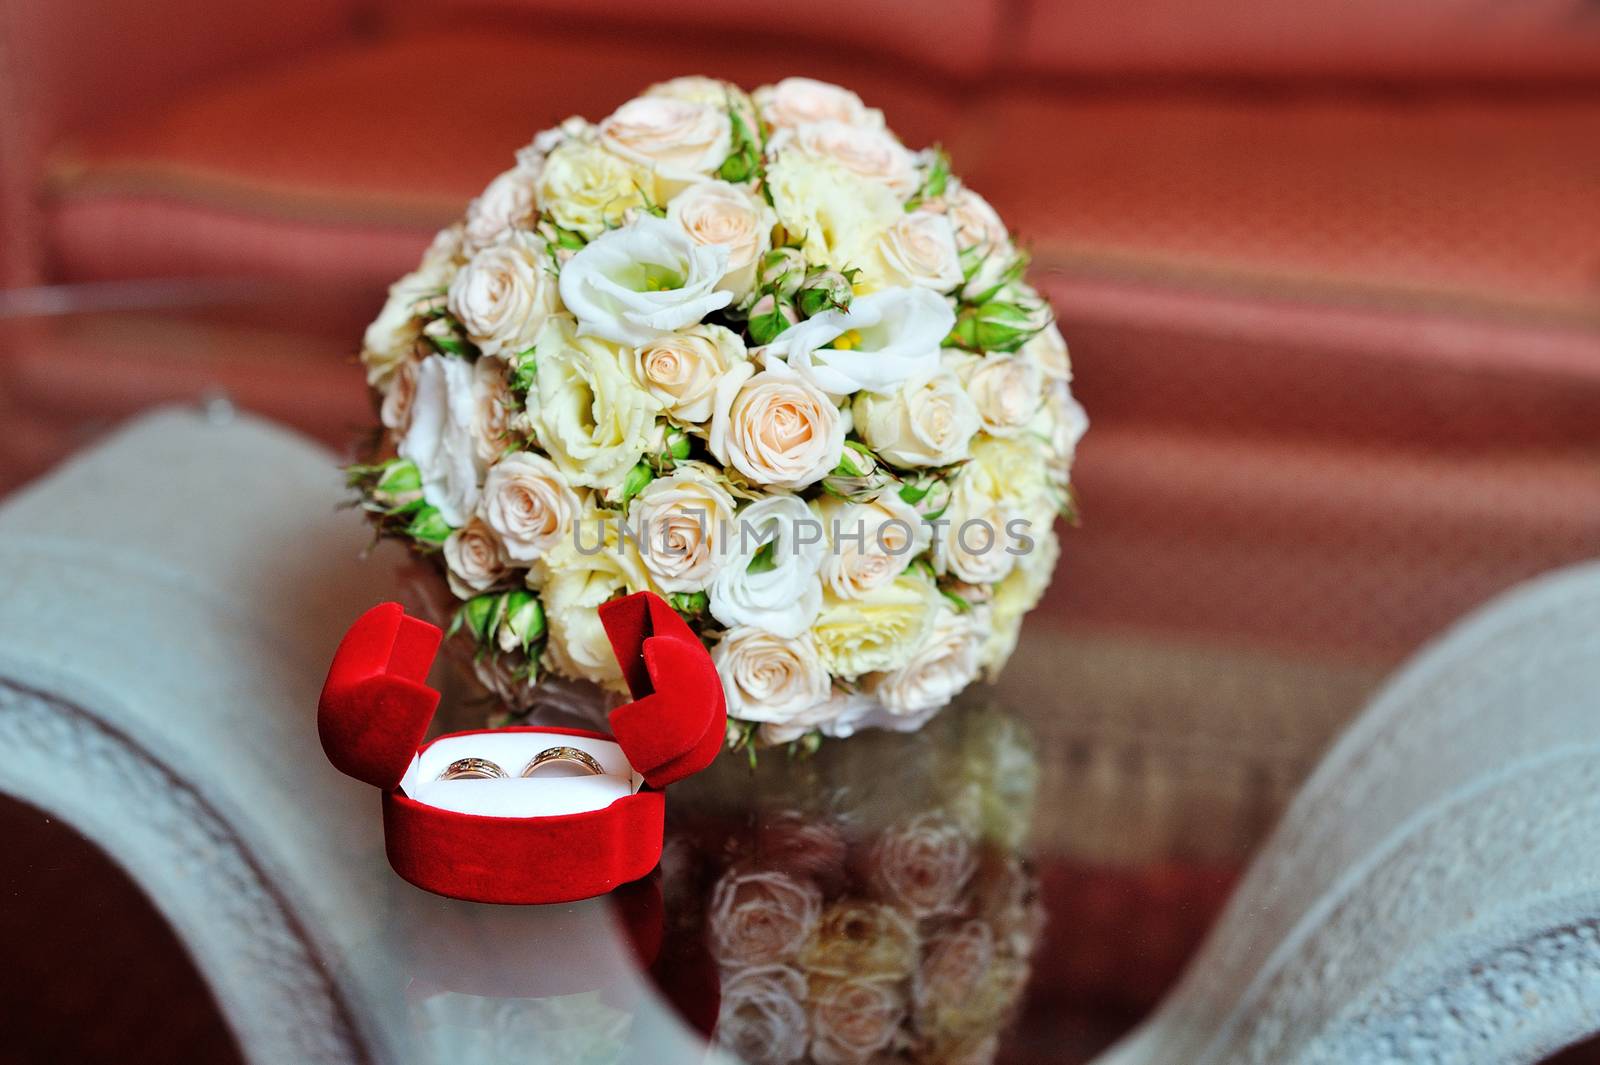 Pair of wedding rings and wedding bouquet.